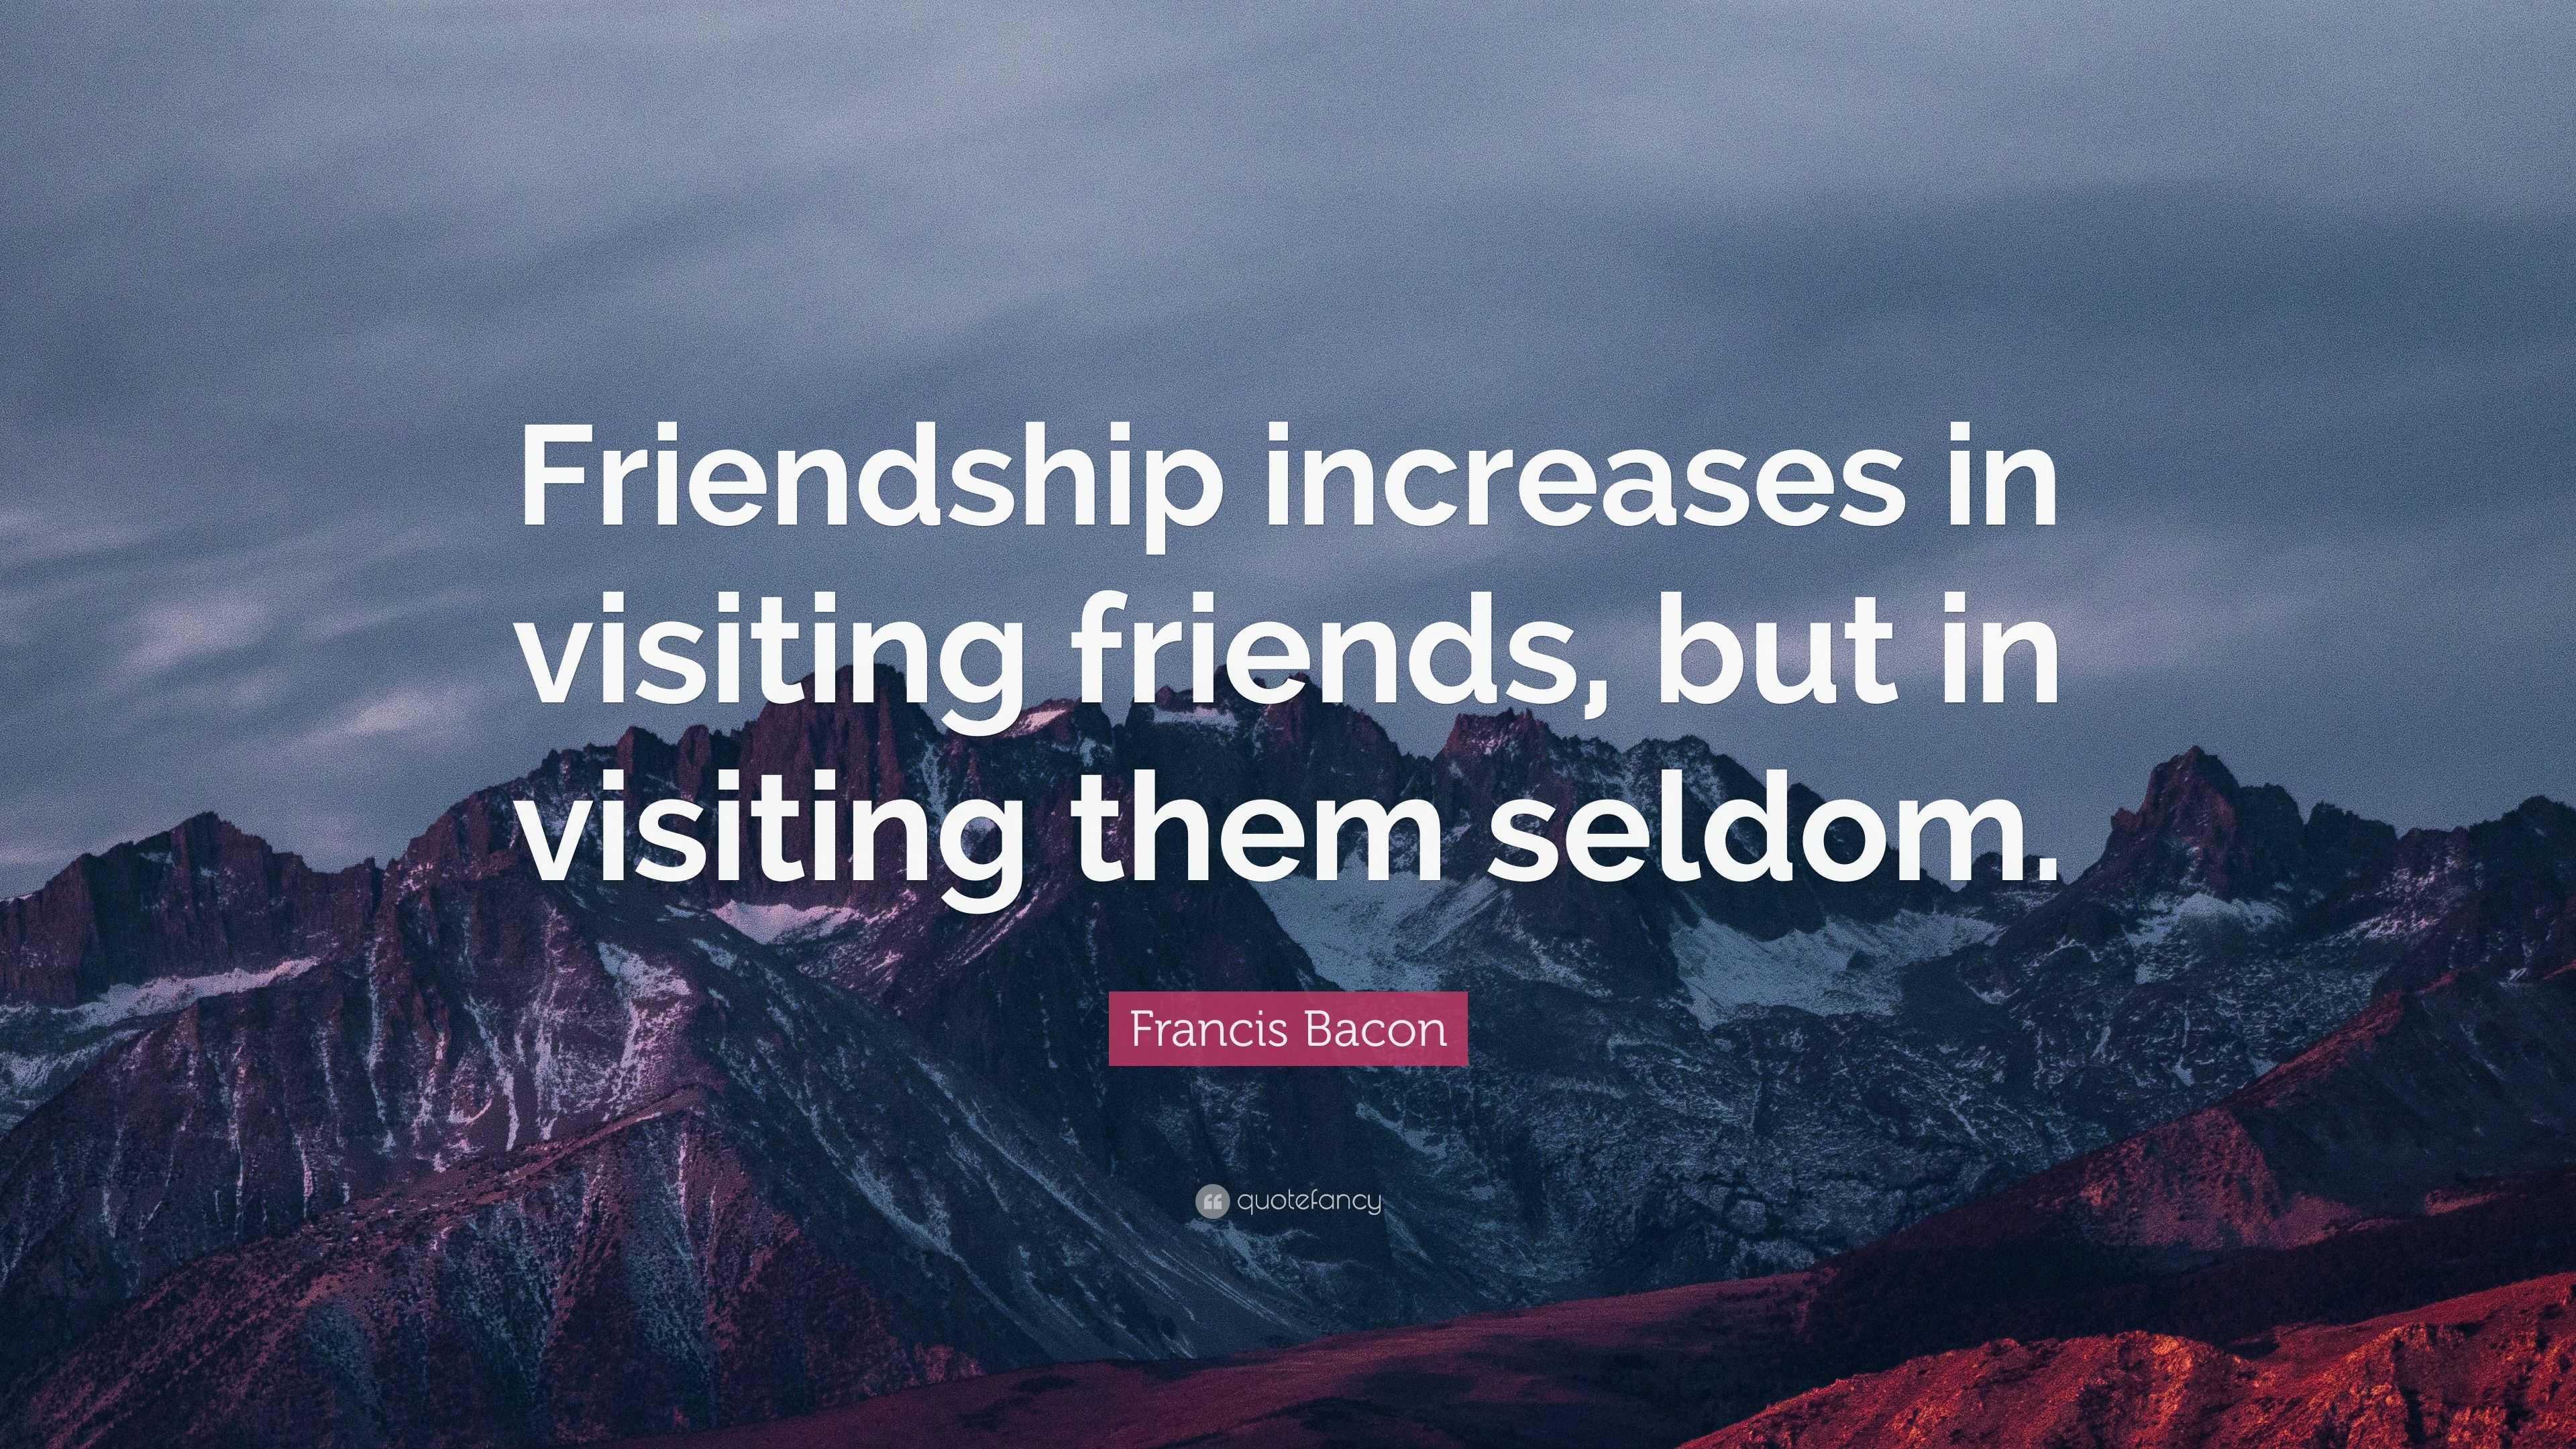 Francis Bacon Quote: “Friendship increases in visiting friends, but in ...